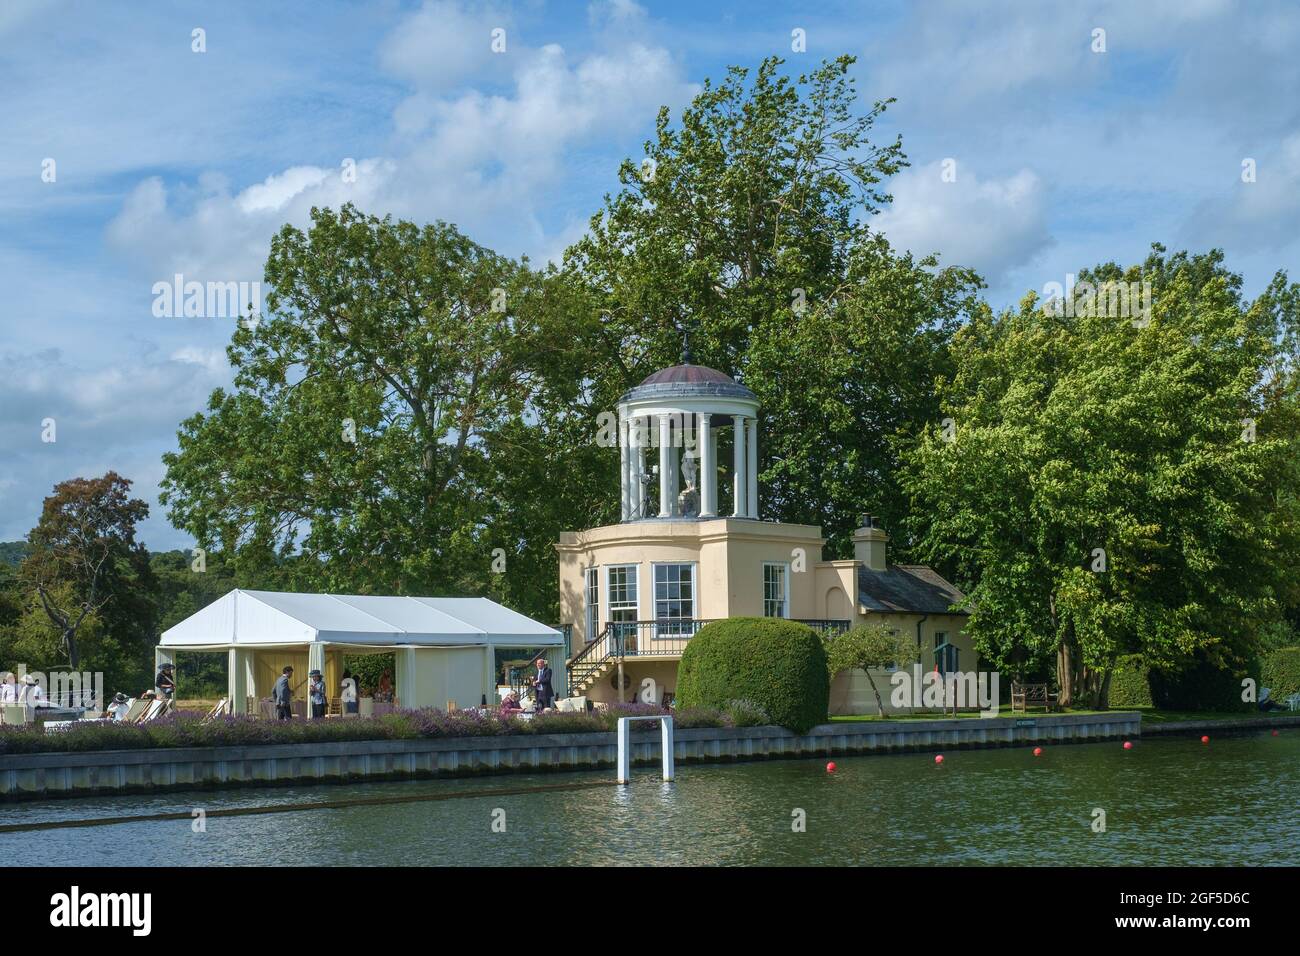 Scenes from Henley Royal Regatta 2021 on the River Thames Stock Photo